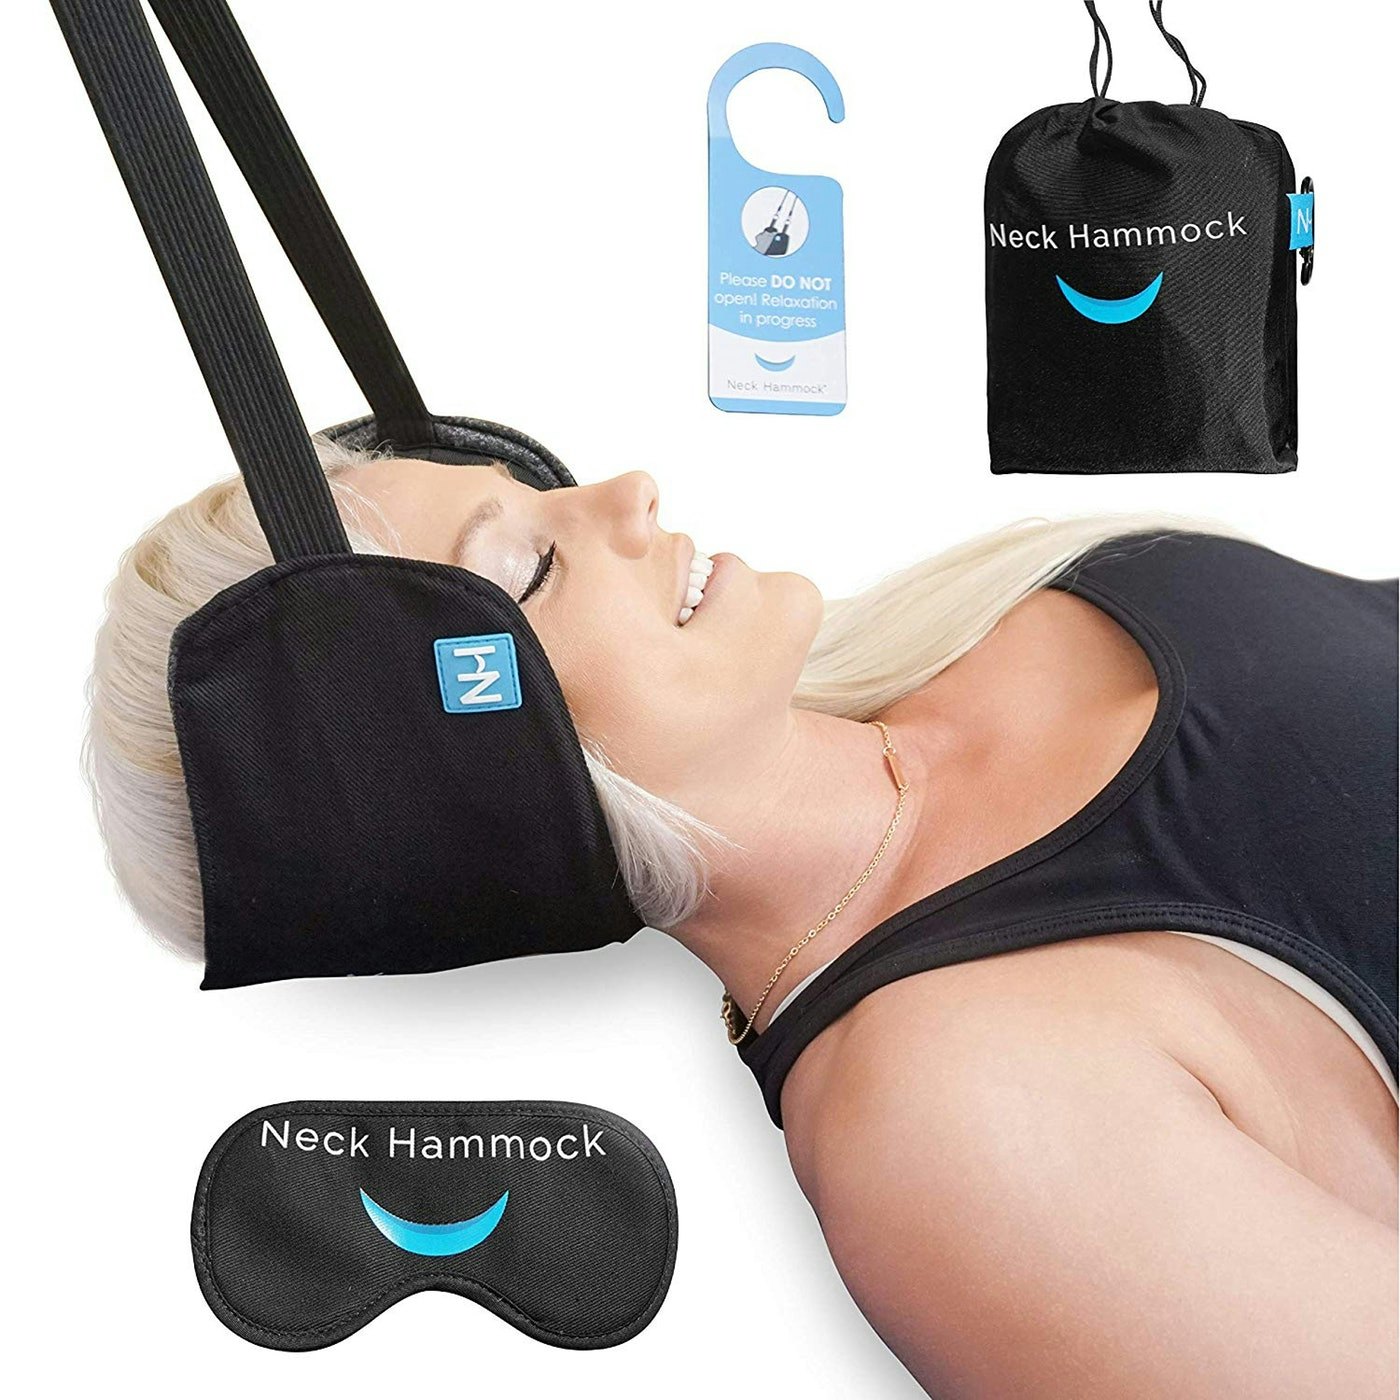 Furfill Hammock for Neck Pain Relief Portable Neck Hammock Traction Device Head Cervical Posture Correction Orthosis Portable Head Hammock Headache Pain Relief Massager Neck Traction Device